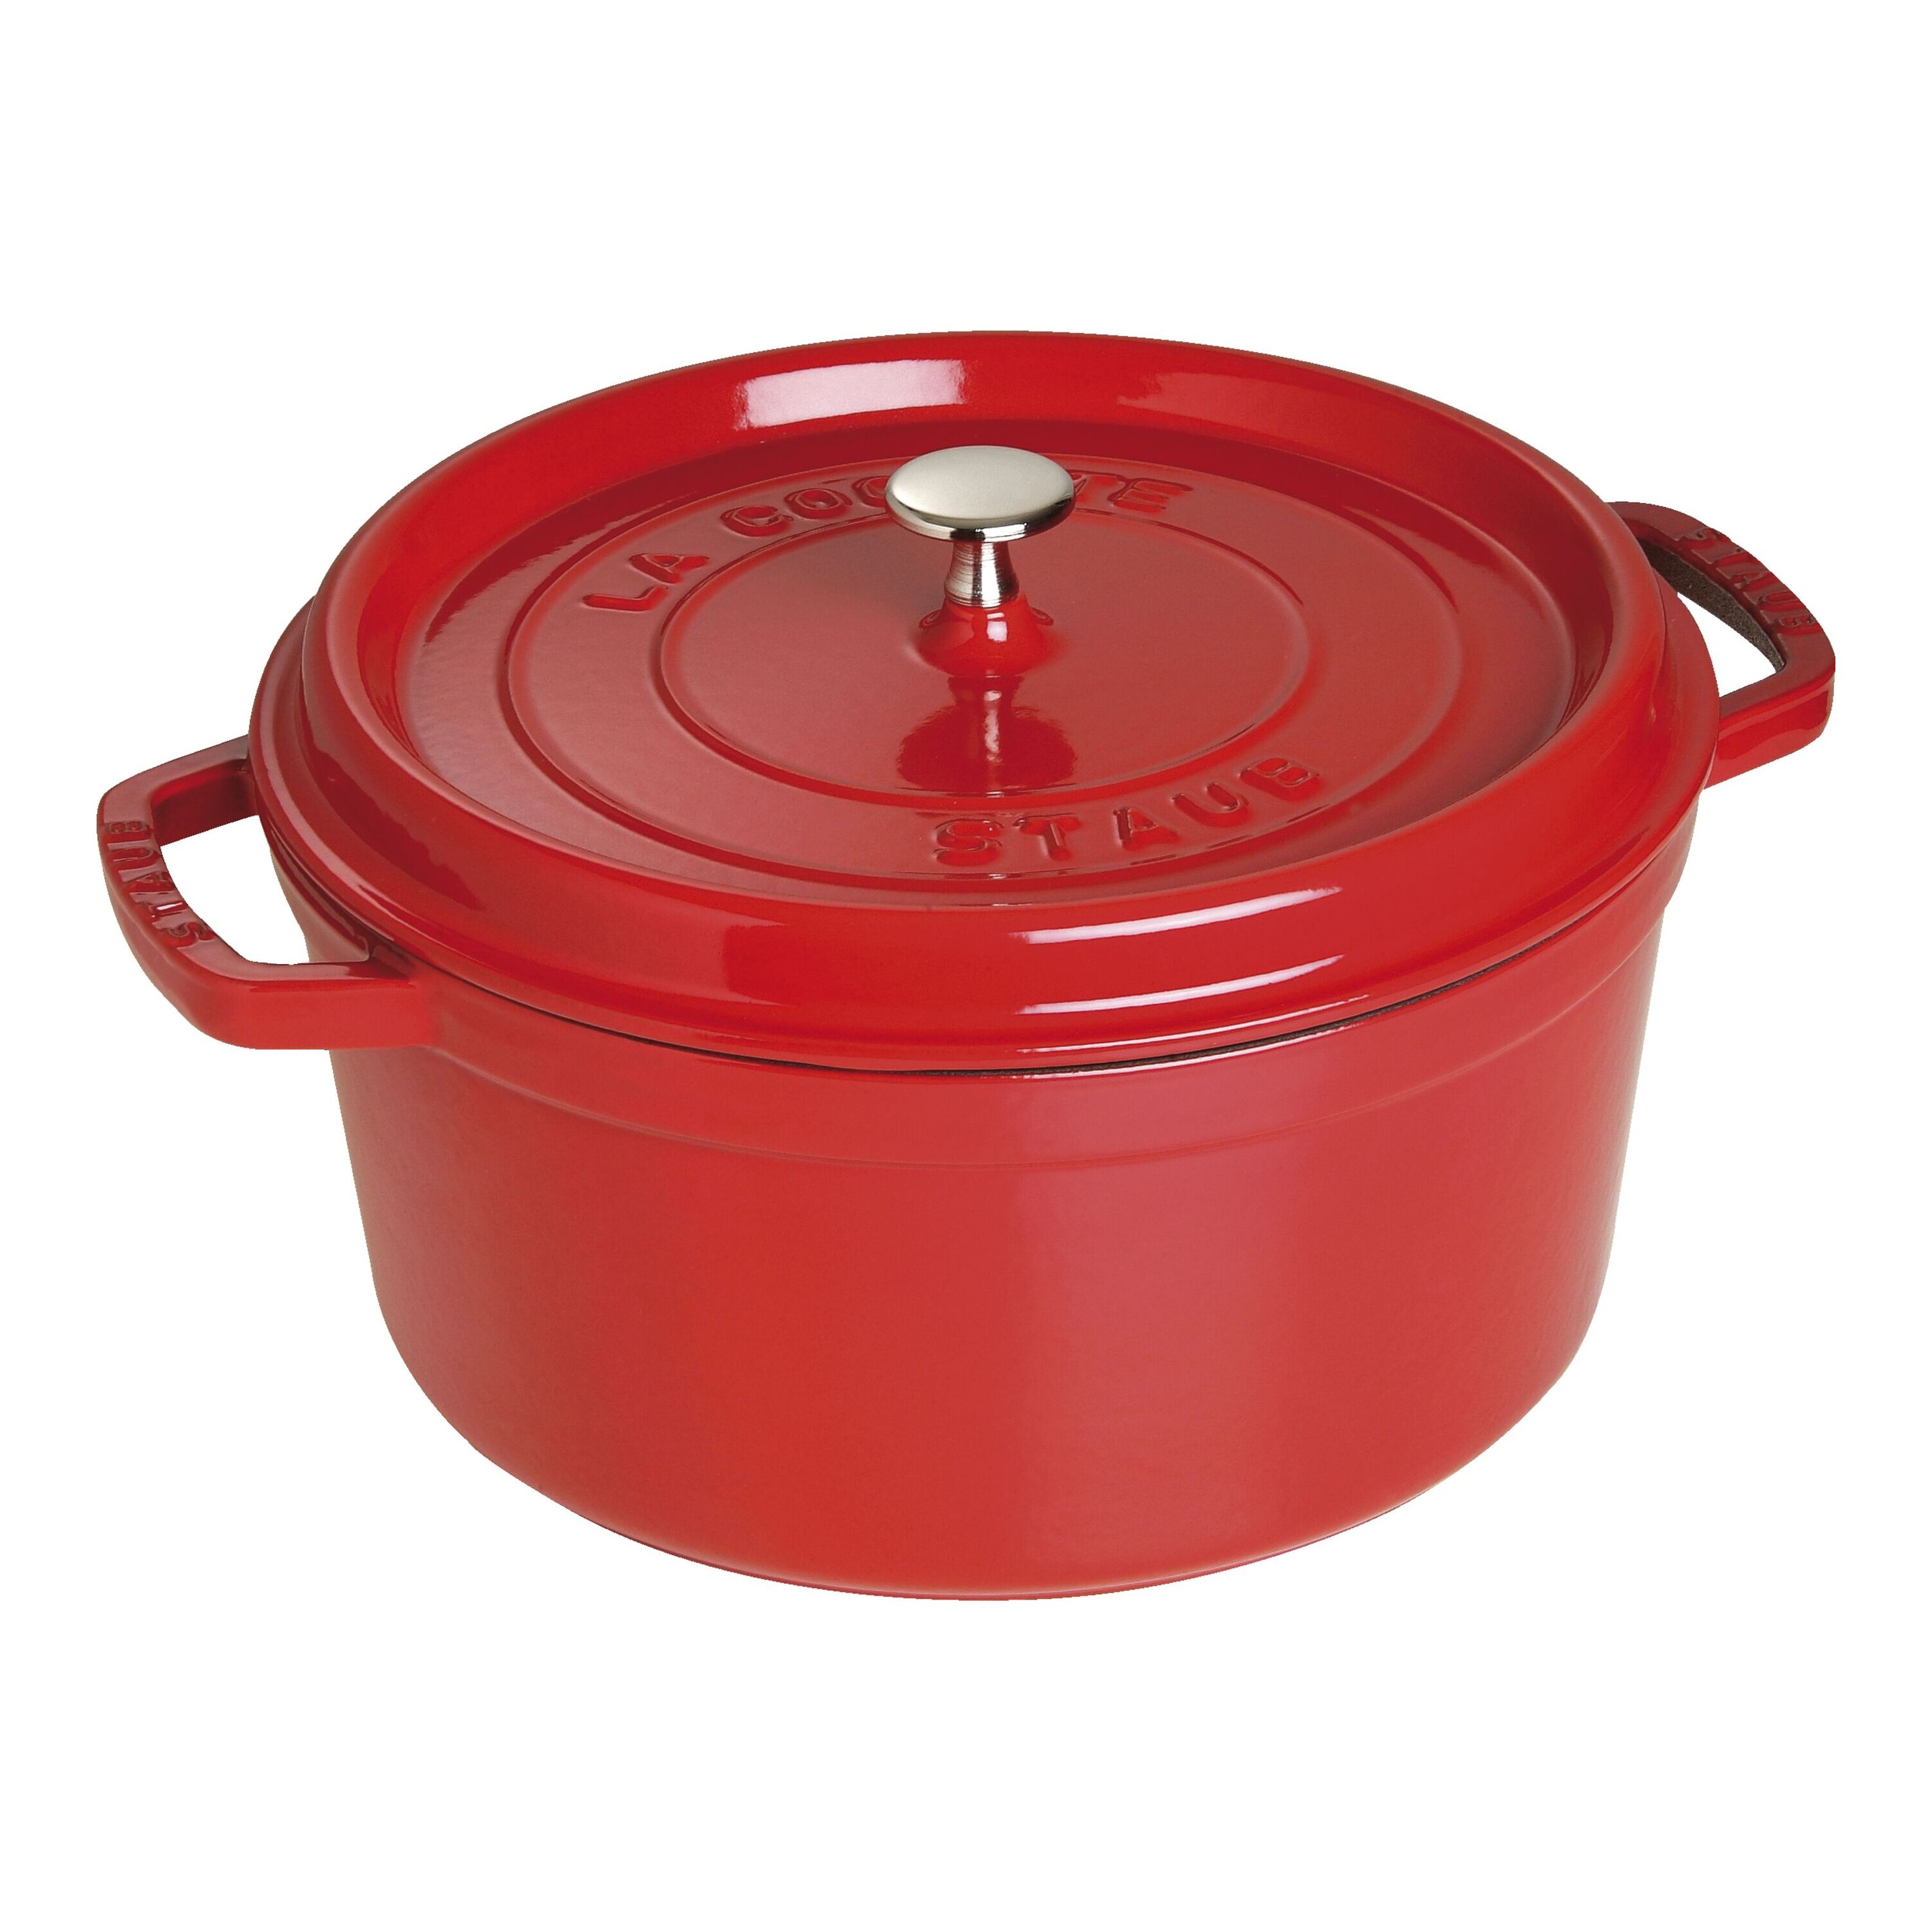 Buy Staub Cast Iron - Round Cocottes Cocotte | ZWILLING.COM